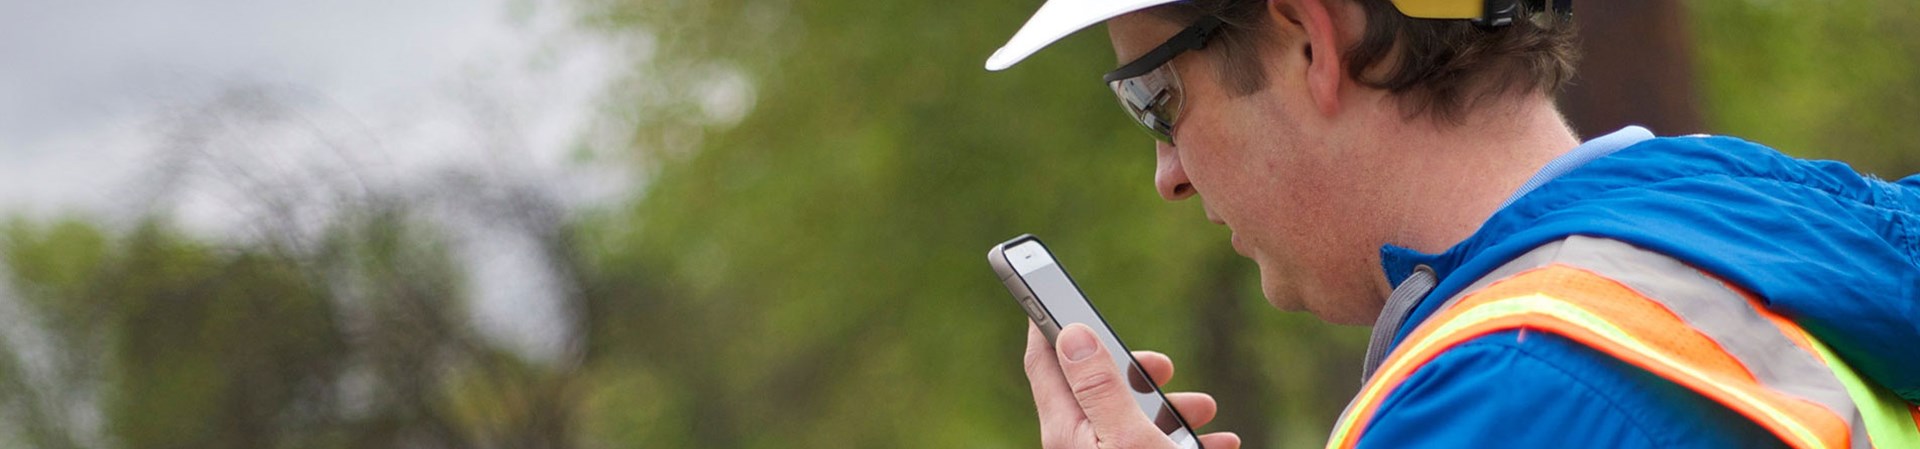 Man Wearing A Hard Hat Speaks Into A Mobile Phone